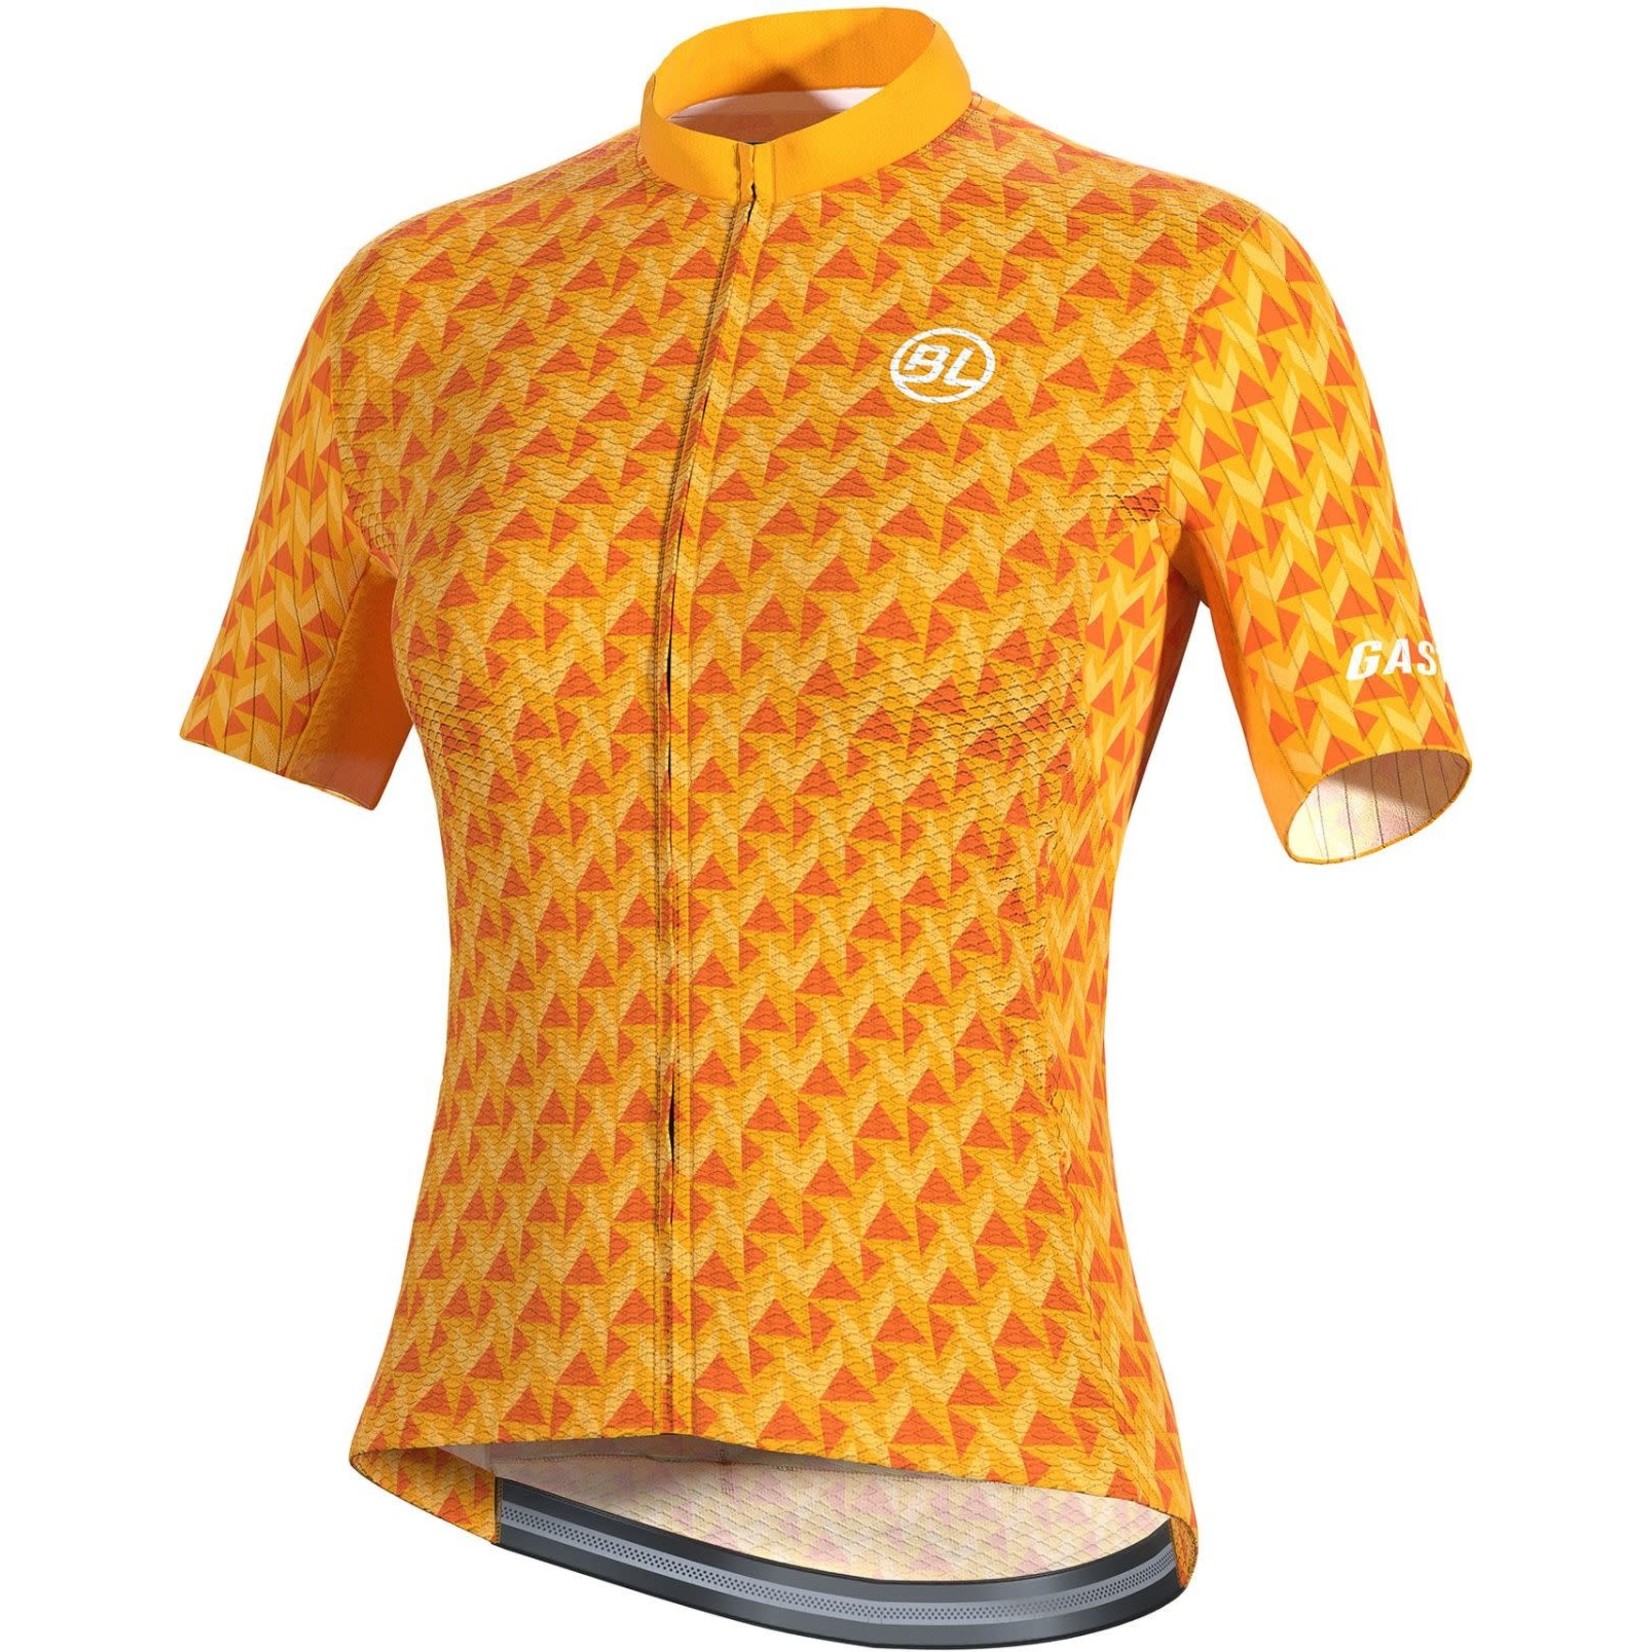 Bicycle-line BL GAST-1 Womens Short Sleeve Jersey